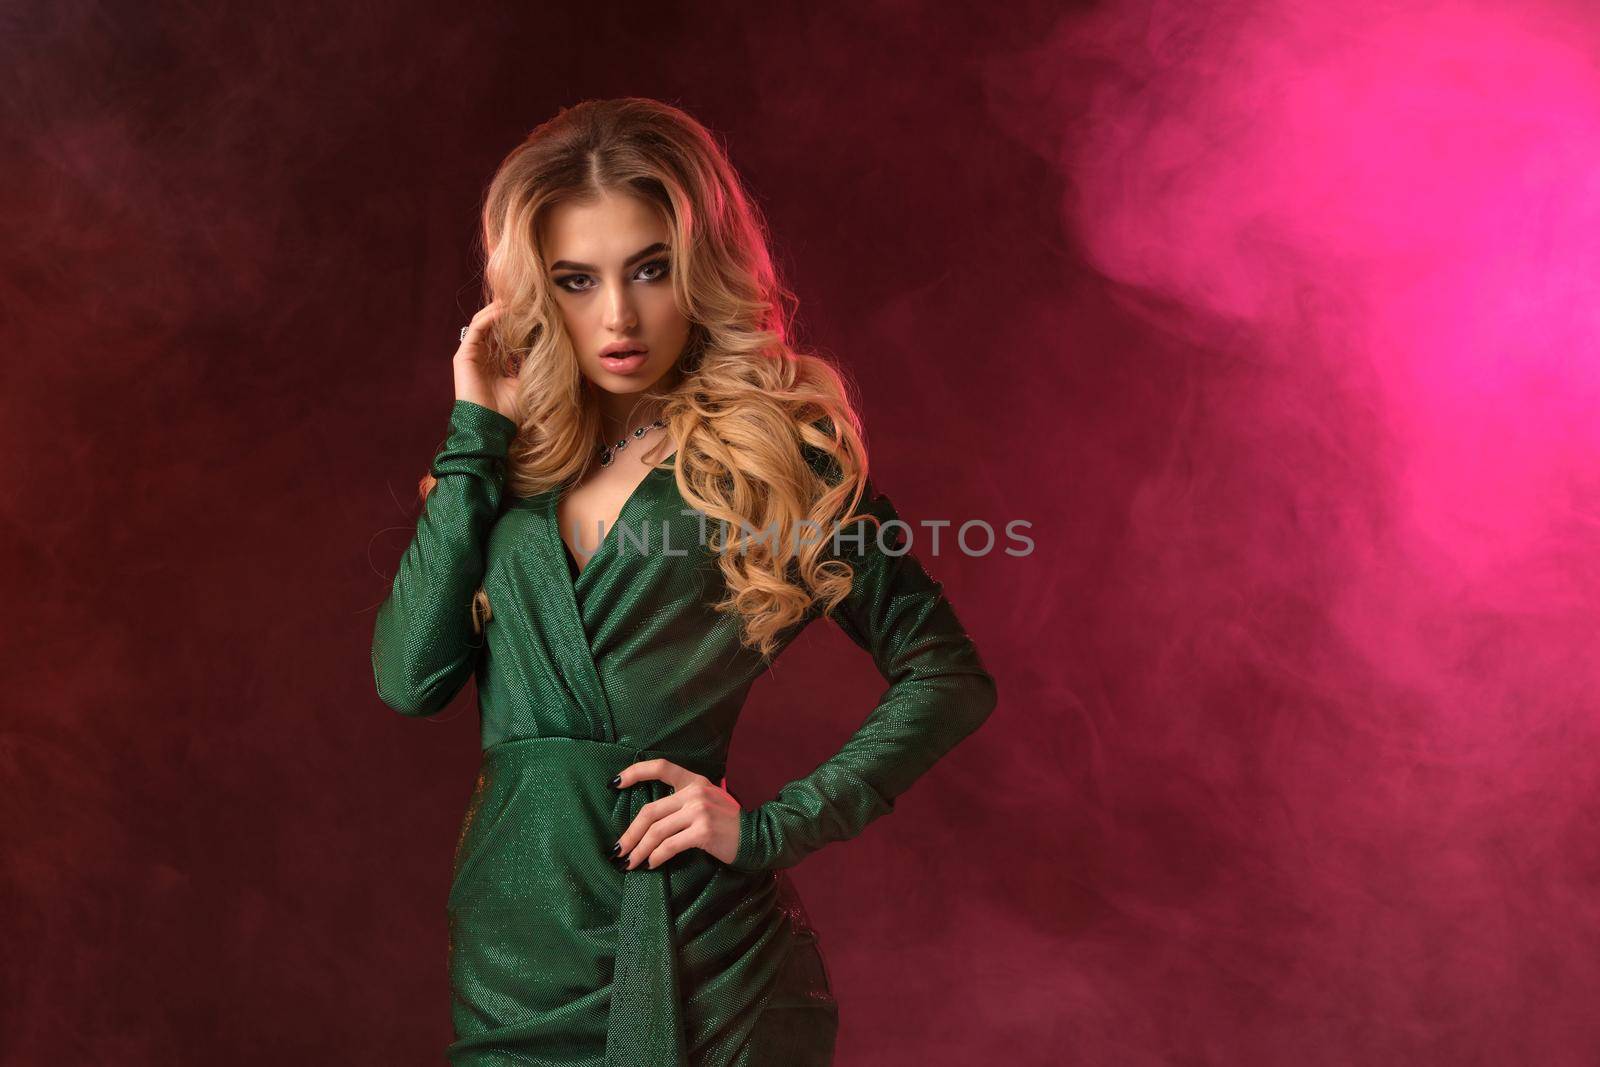 Attractive blonde woman with bright make-up, in green stylish dress and jewelry. She is touching her hair, hand on waist, posing against colorful smoky studio background. Fashion and beauty. Close-up.